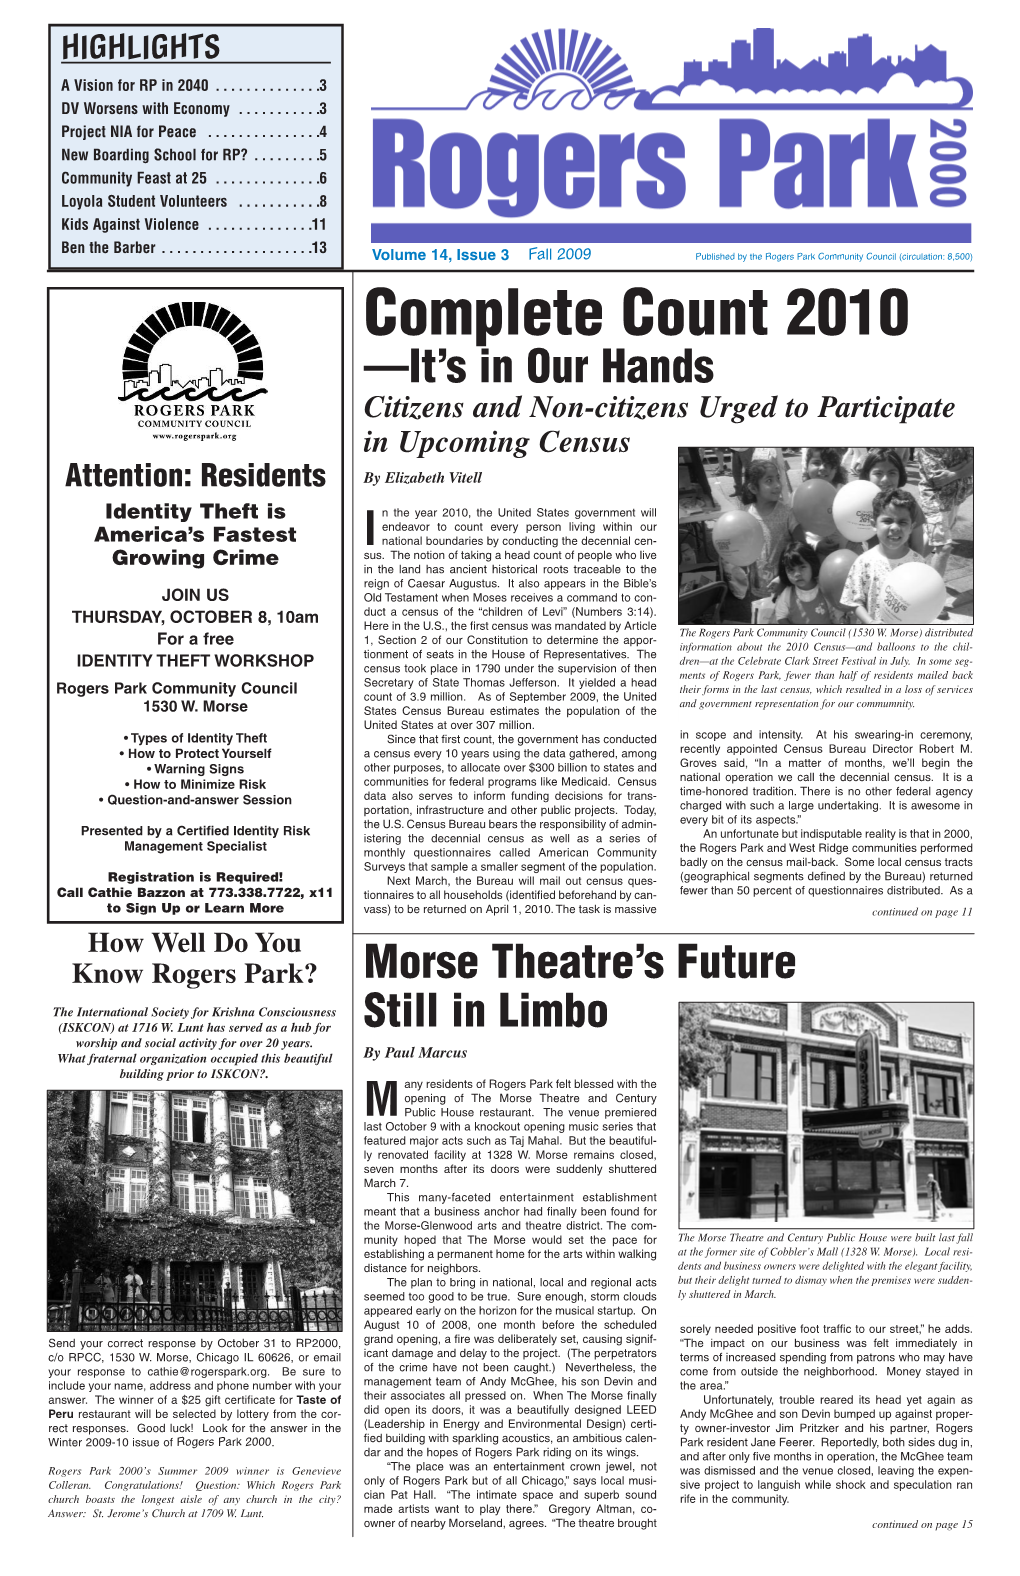 Complete Count 2010 —It’S in Our Hands Citizens and Non-Citizens Urged to Participate in Upcoming Census Attention: Residents by Elizabeth Vitell